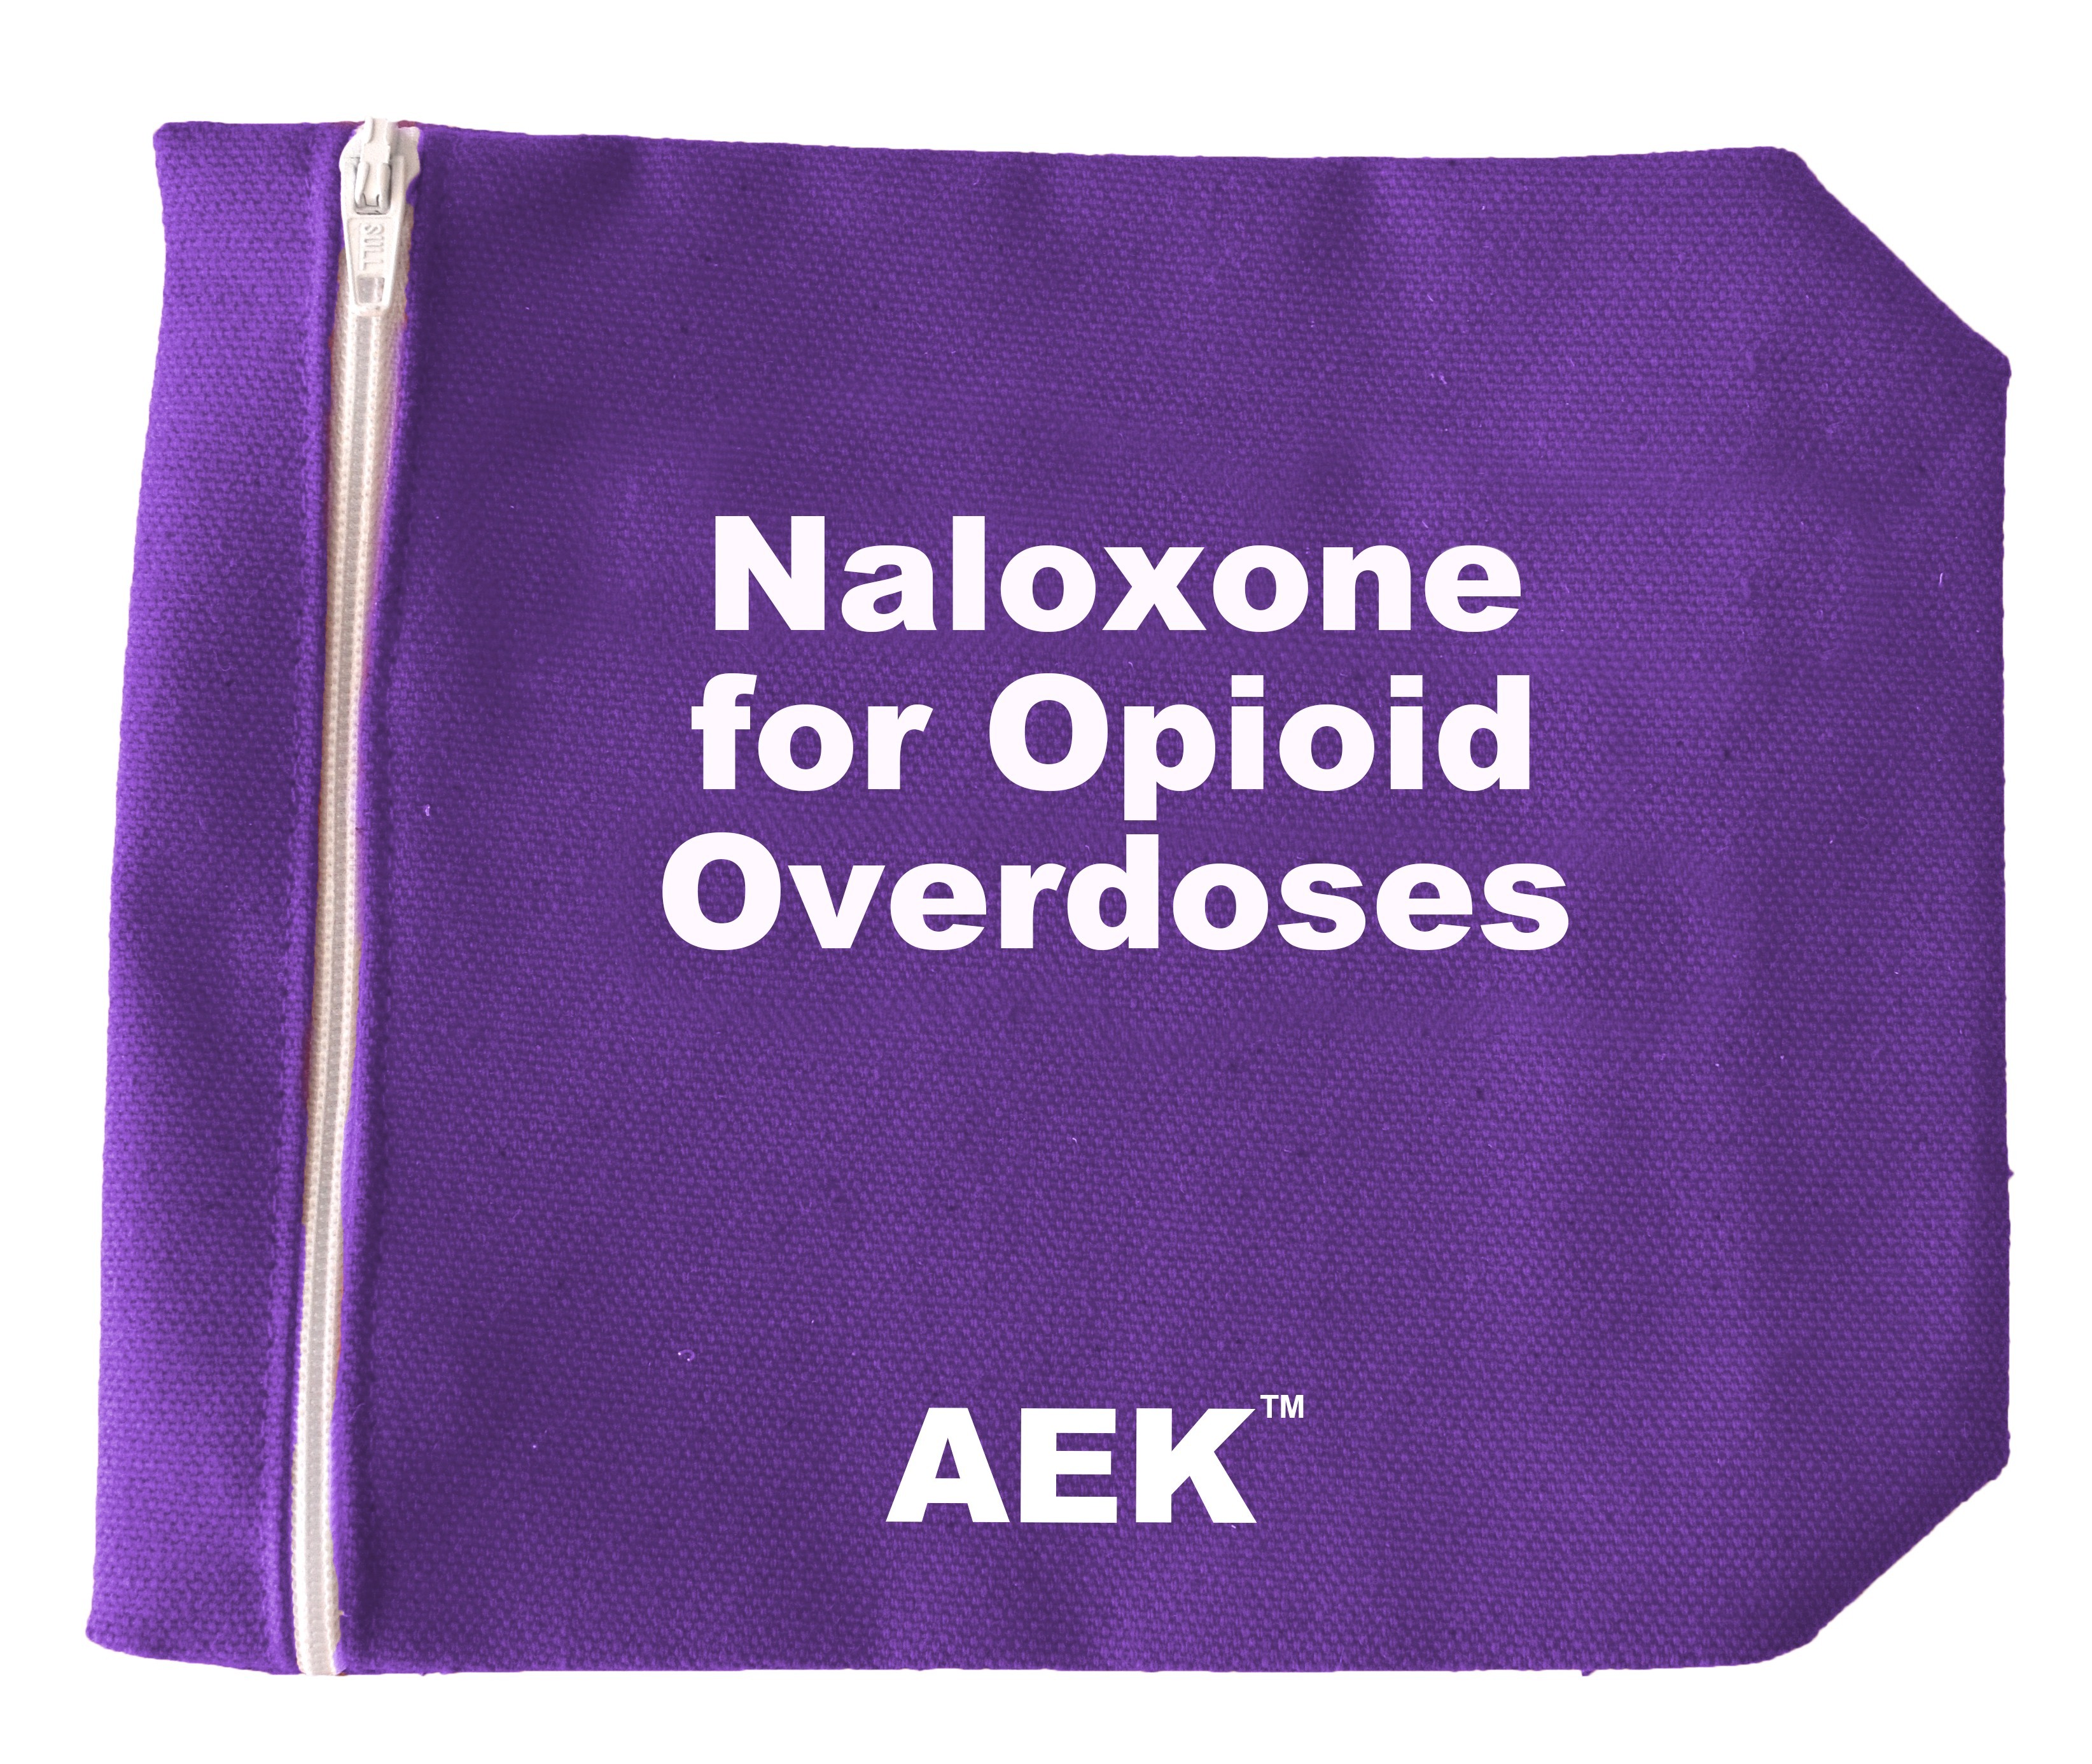 Overdose Emergency Carrying Bag